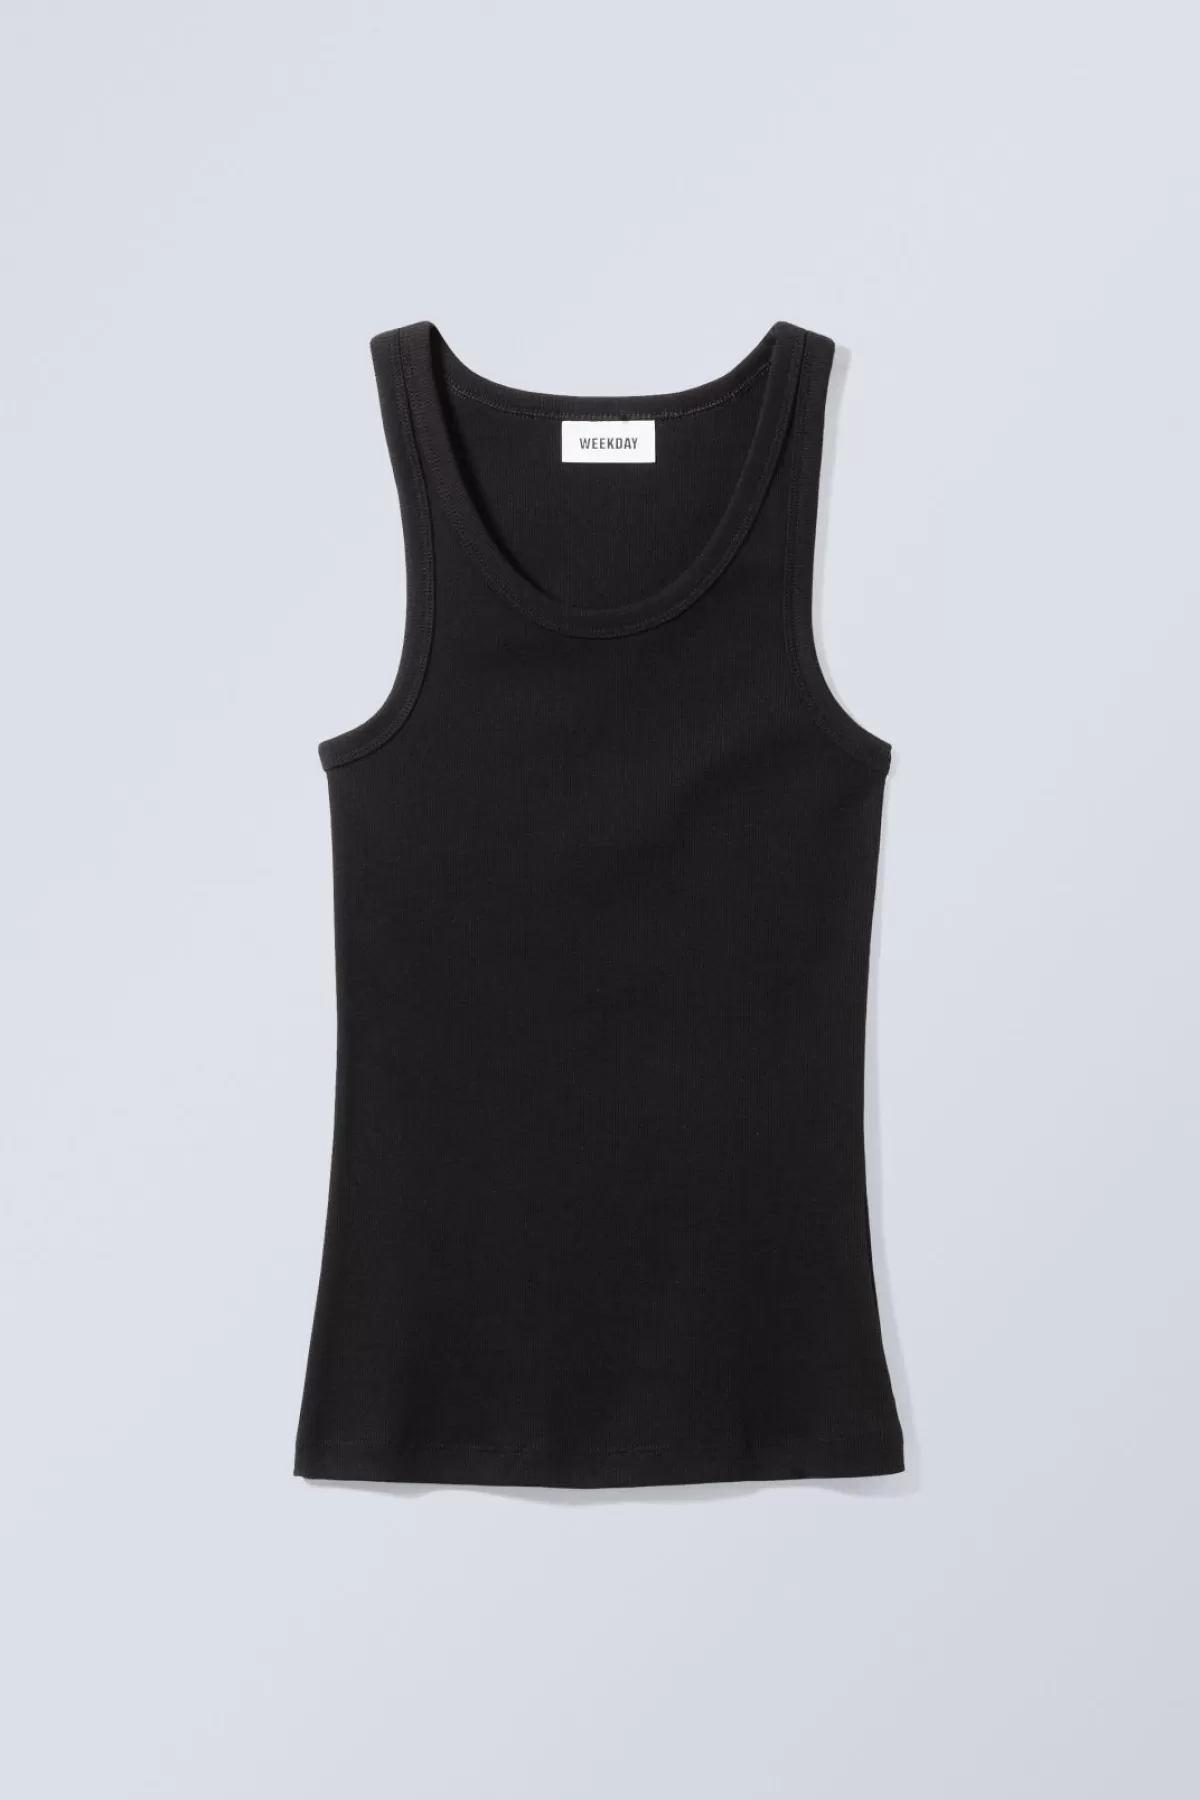 Weekday Close Fitted Tank Top Black Clearance